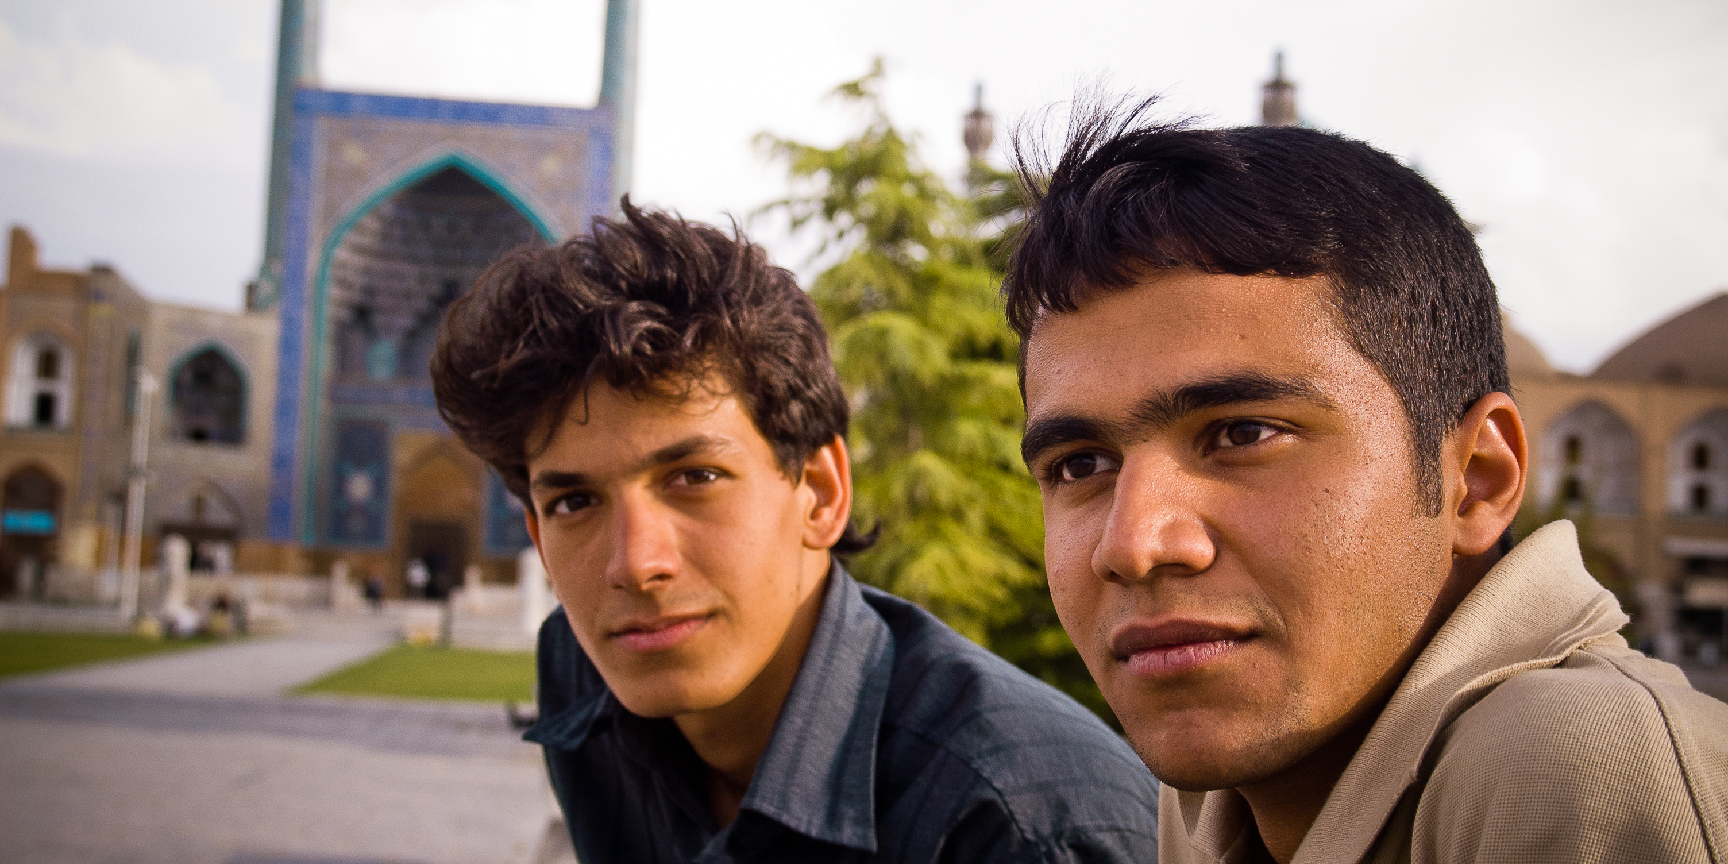 Two young men in a Persian speaking country